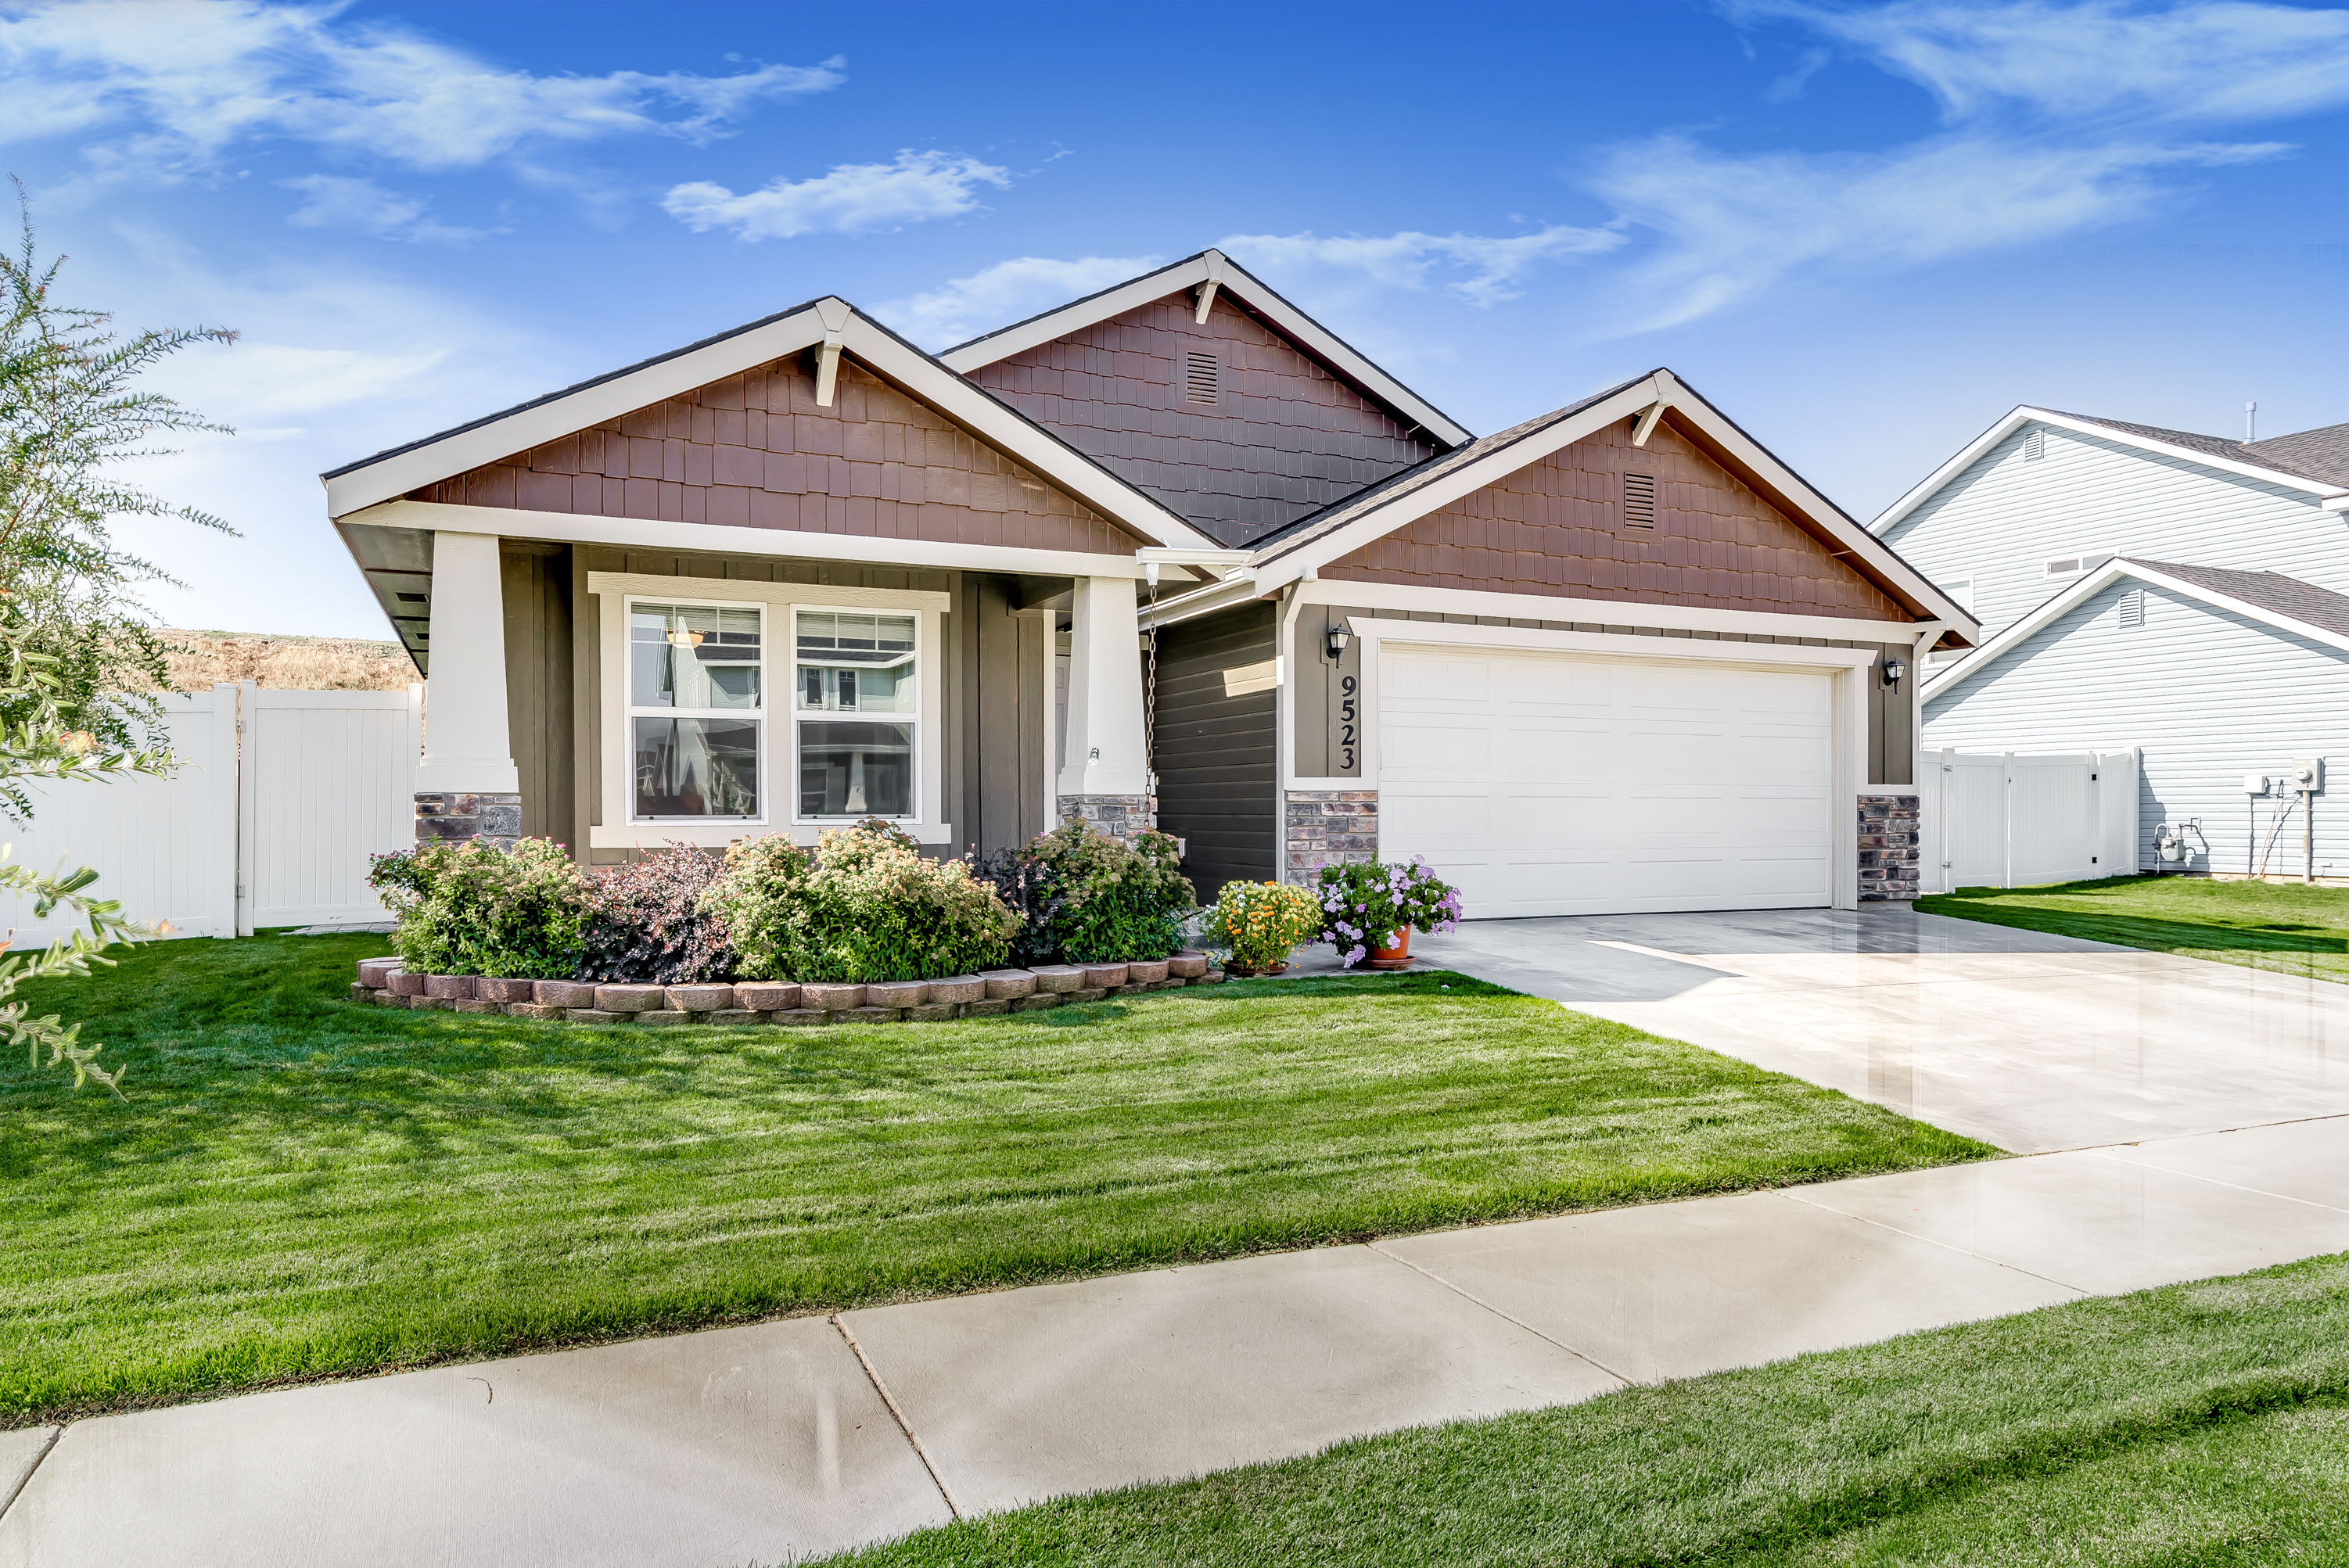 SOLD IN 3 DAYS! | South Boise's Charter Pointe | GREAT Home for Sale!